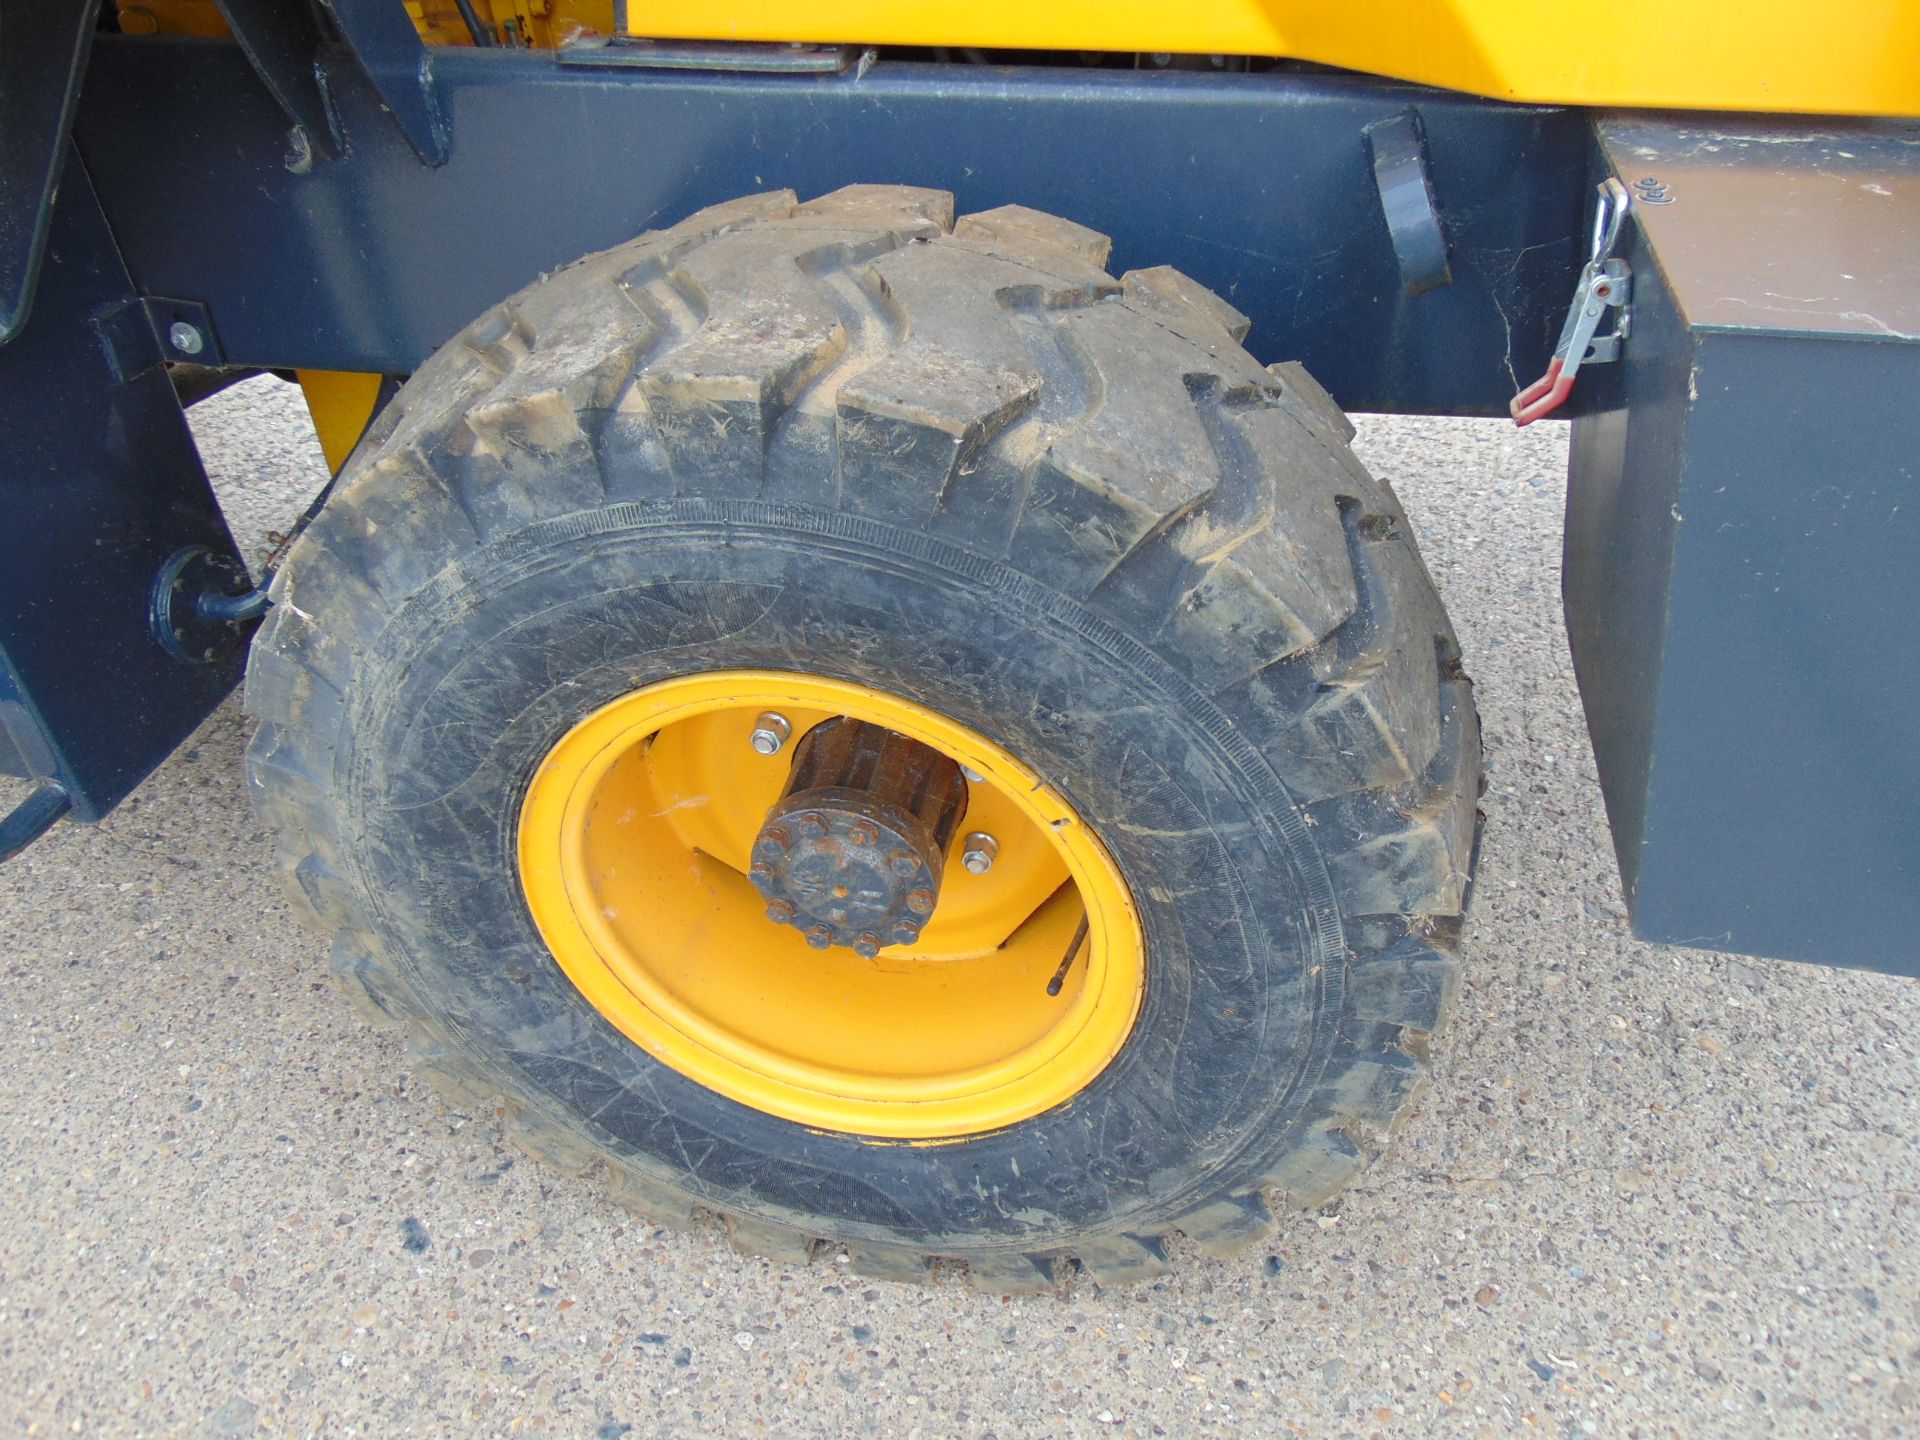 You are bidding for a New and Unused TW 36 4x4 Diesel Artic Wheel Loader - Bild 13 aus 26